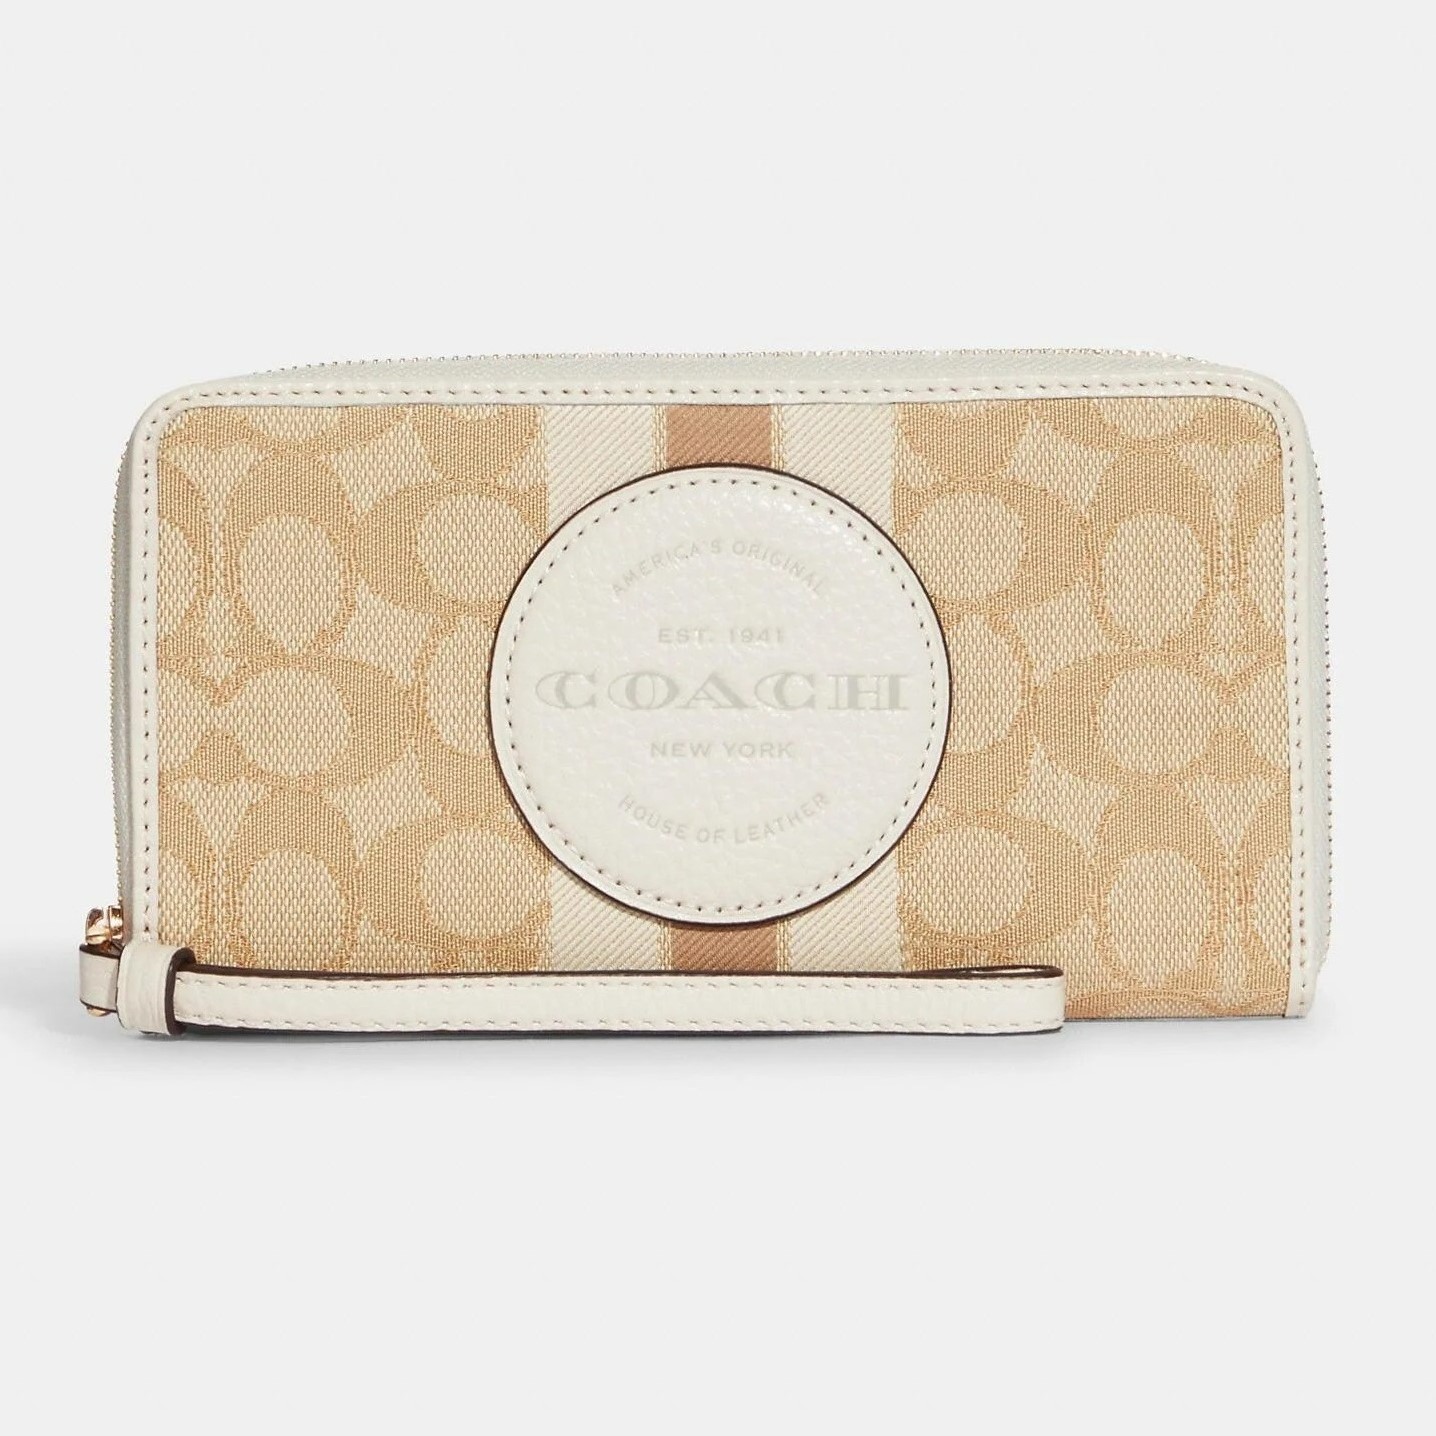 VÍ COACH DEMPSEY LARGE PHONE WALLET IN SIGNATURE JACQUARD WITH STRIPE AND COACH PATCH 6